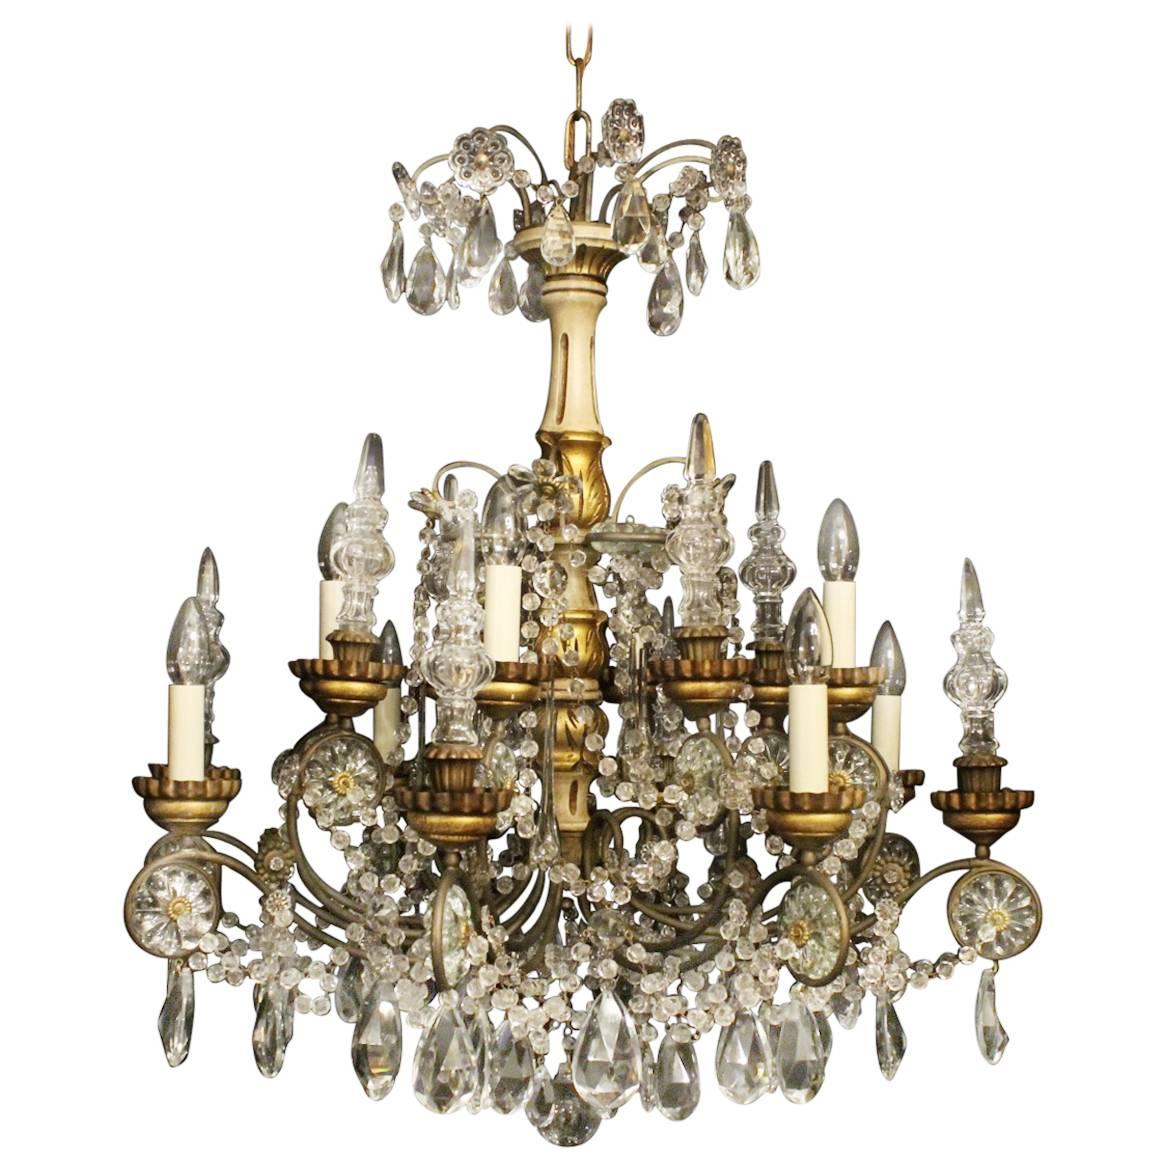 Italian Giltwood and Crystal Eight-Light Antique Chandelier